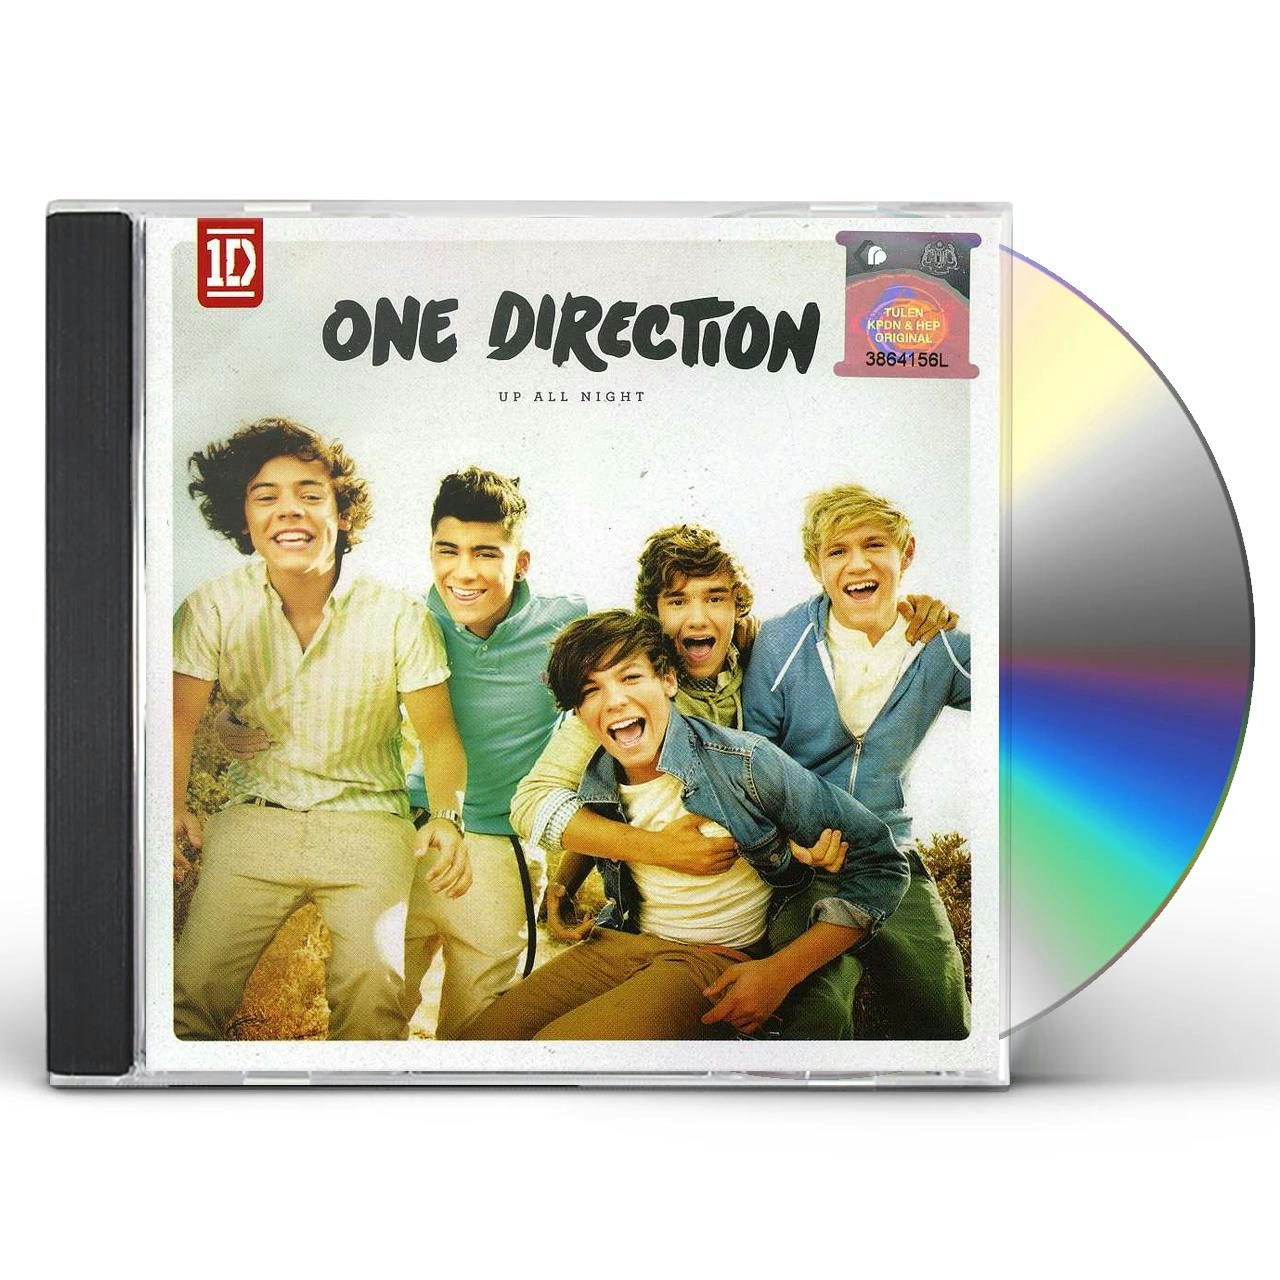 One Direction Up All Night Jewelcase Cd